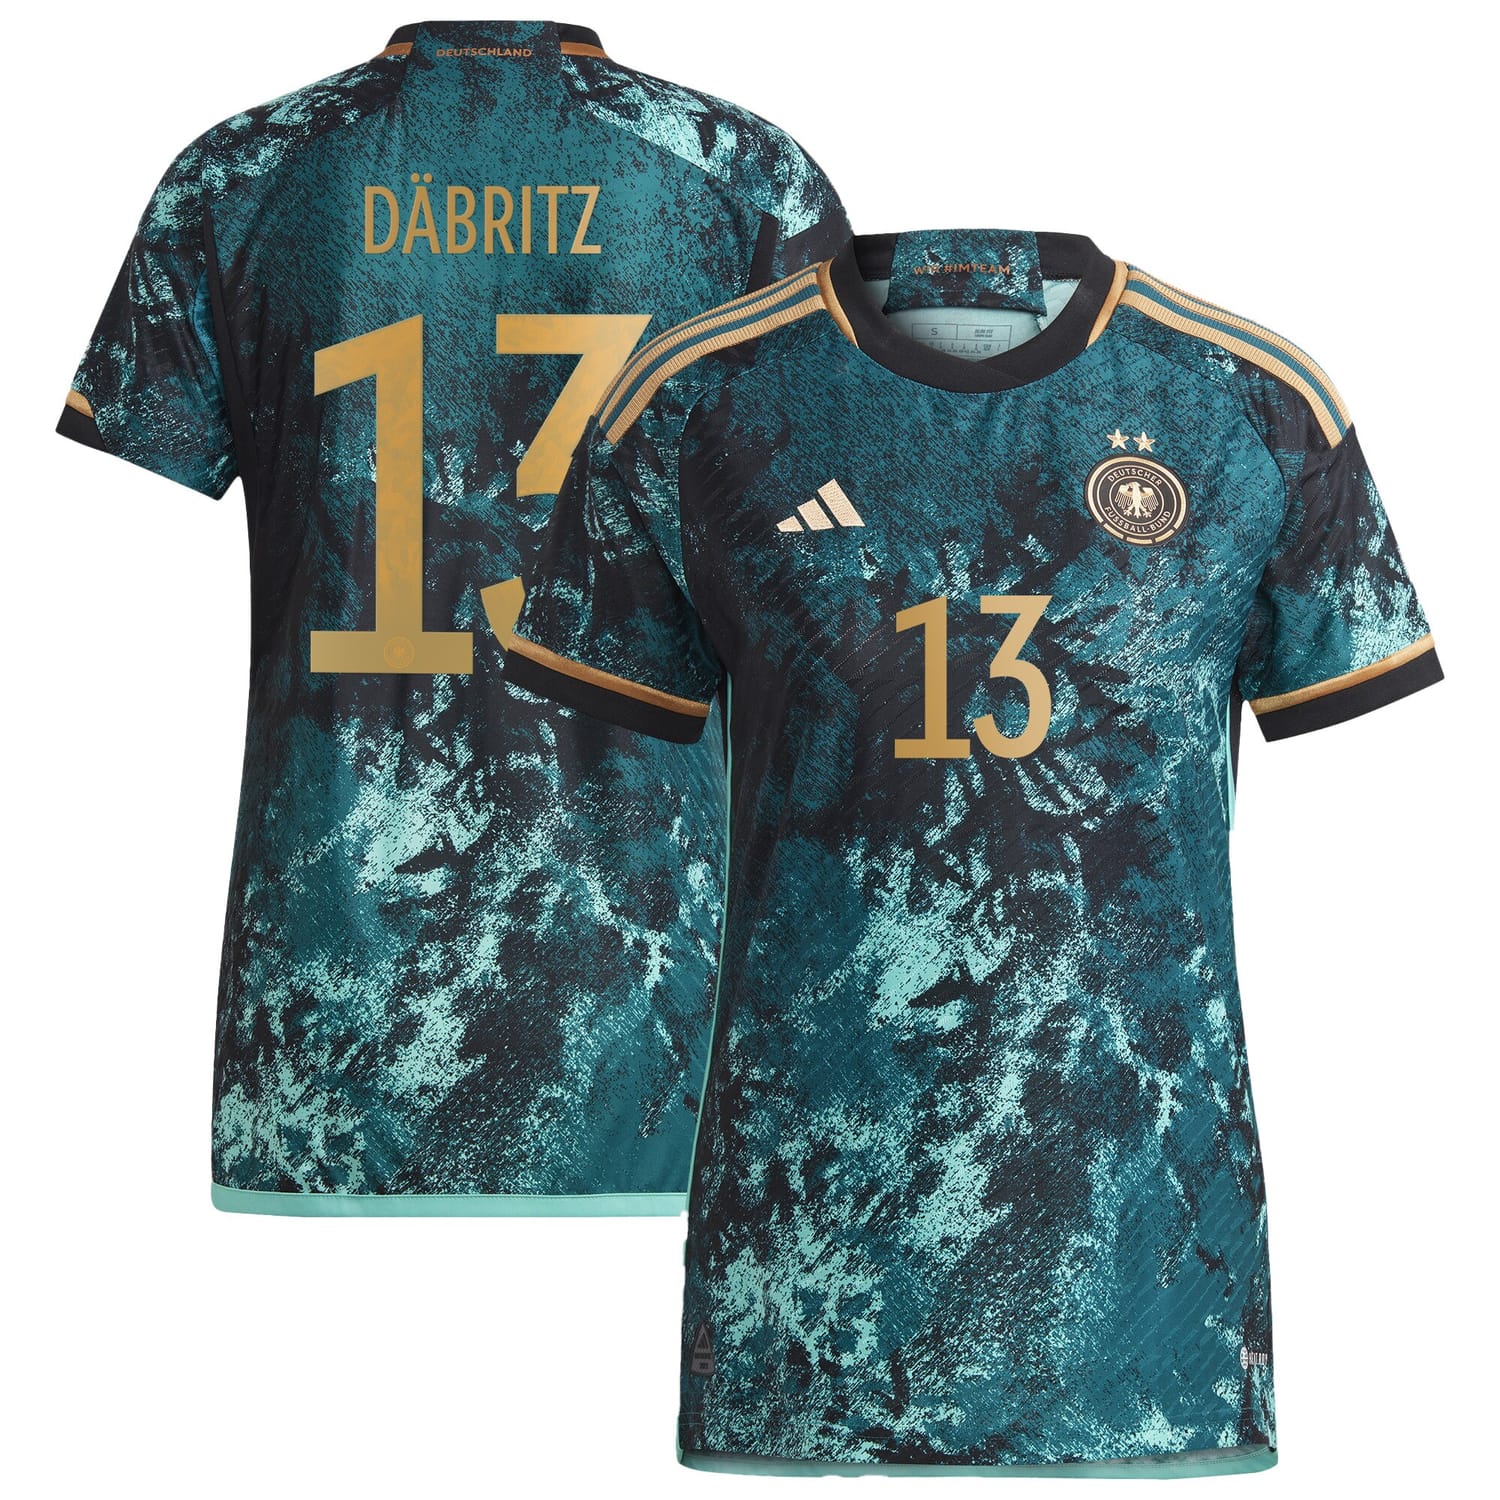 Germany National Team Away Authentic Jersey Shirt 2023 player Sara Däbritz 13 printing for Women